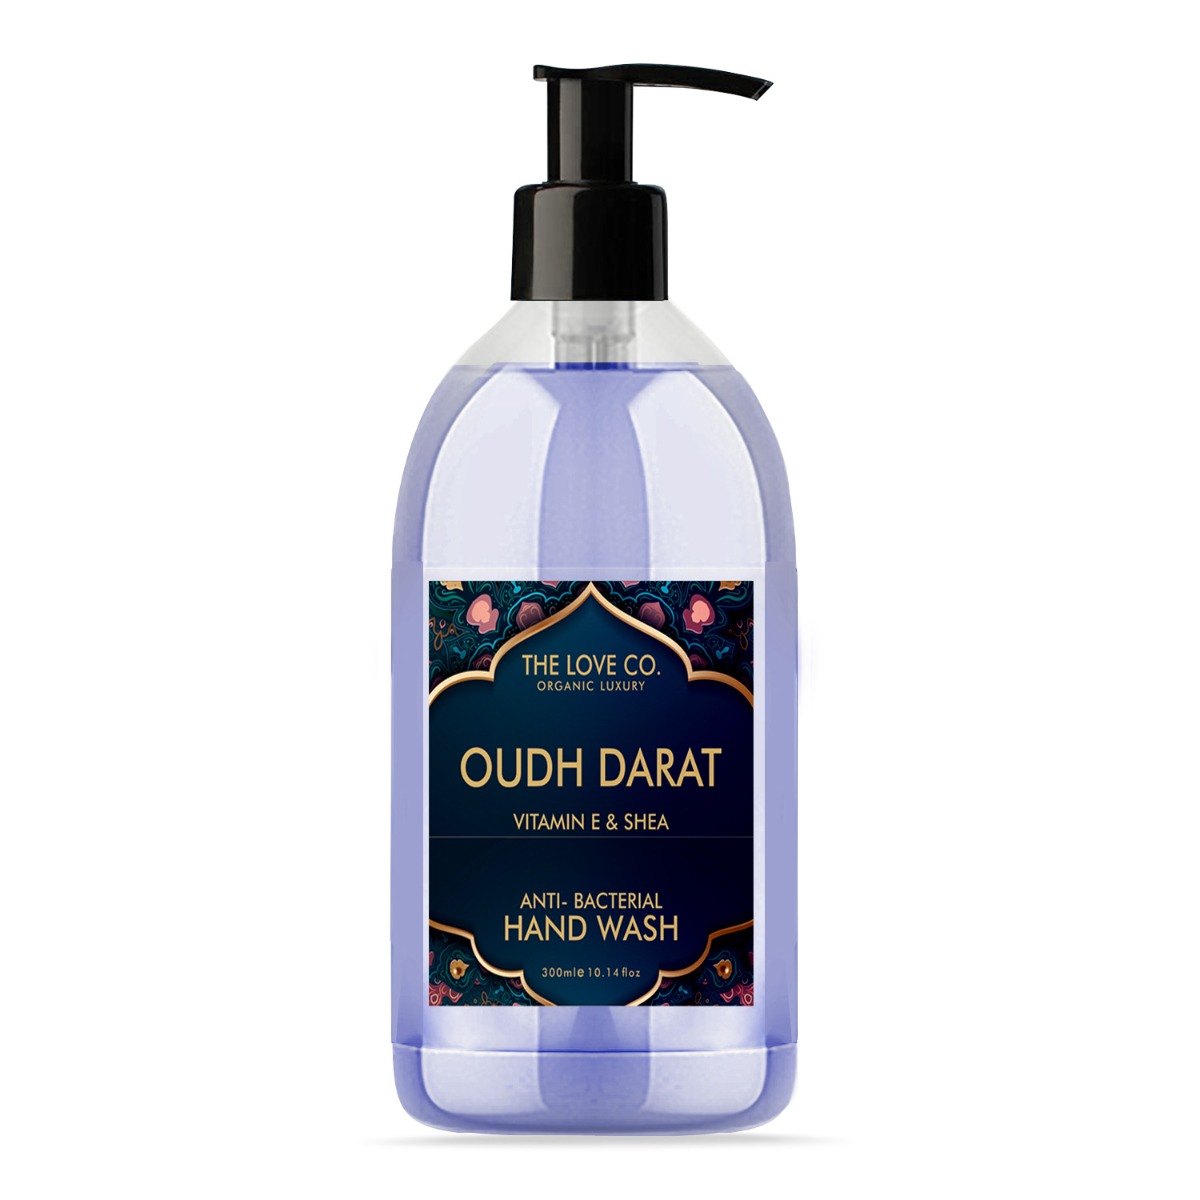 The Love Co. Oudh Darat Anti-Bacterial Hand Wash, 300ml